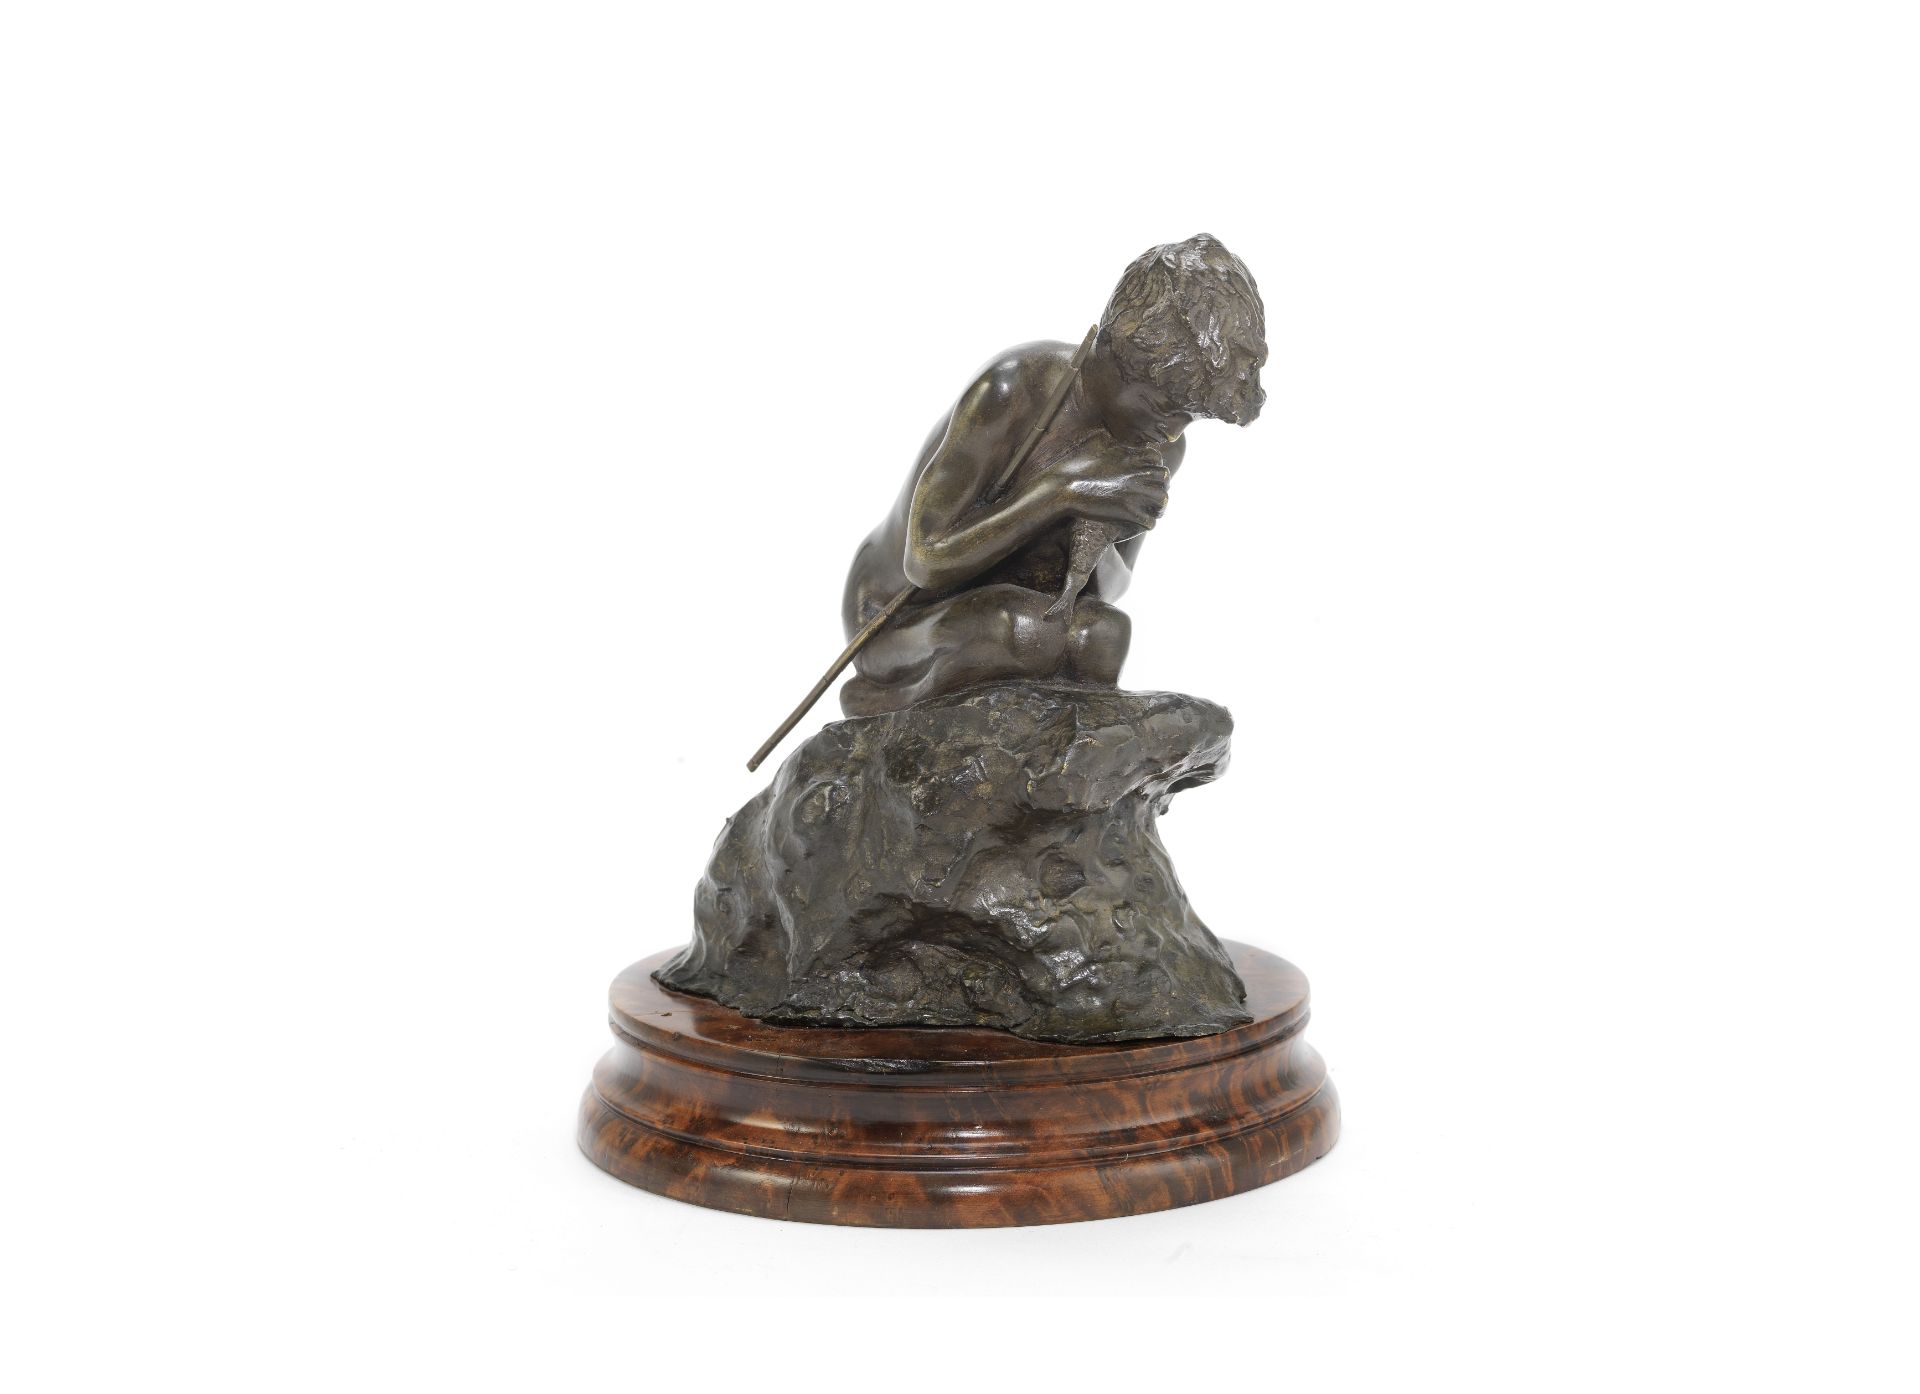 Vincenzo Gemito (Italian, 1852-1929): A patinated bronze figure of a fisherboy